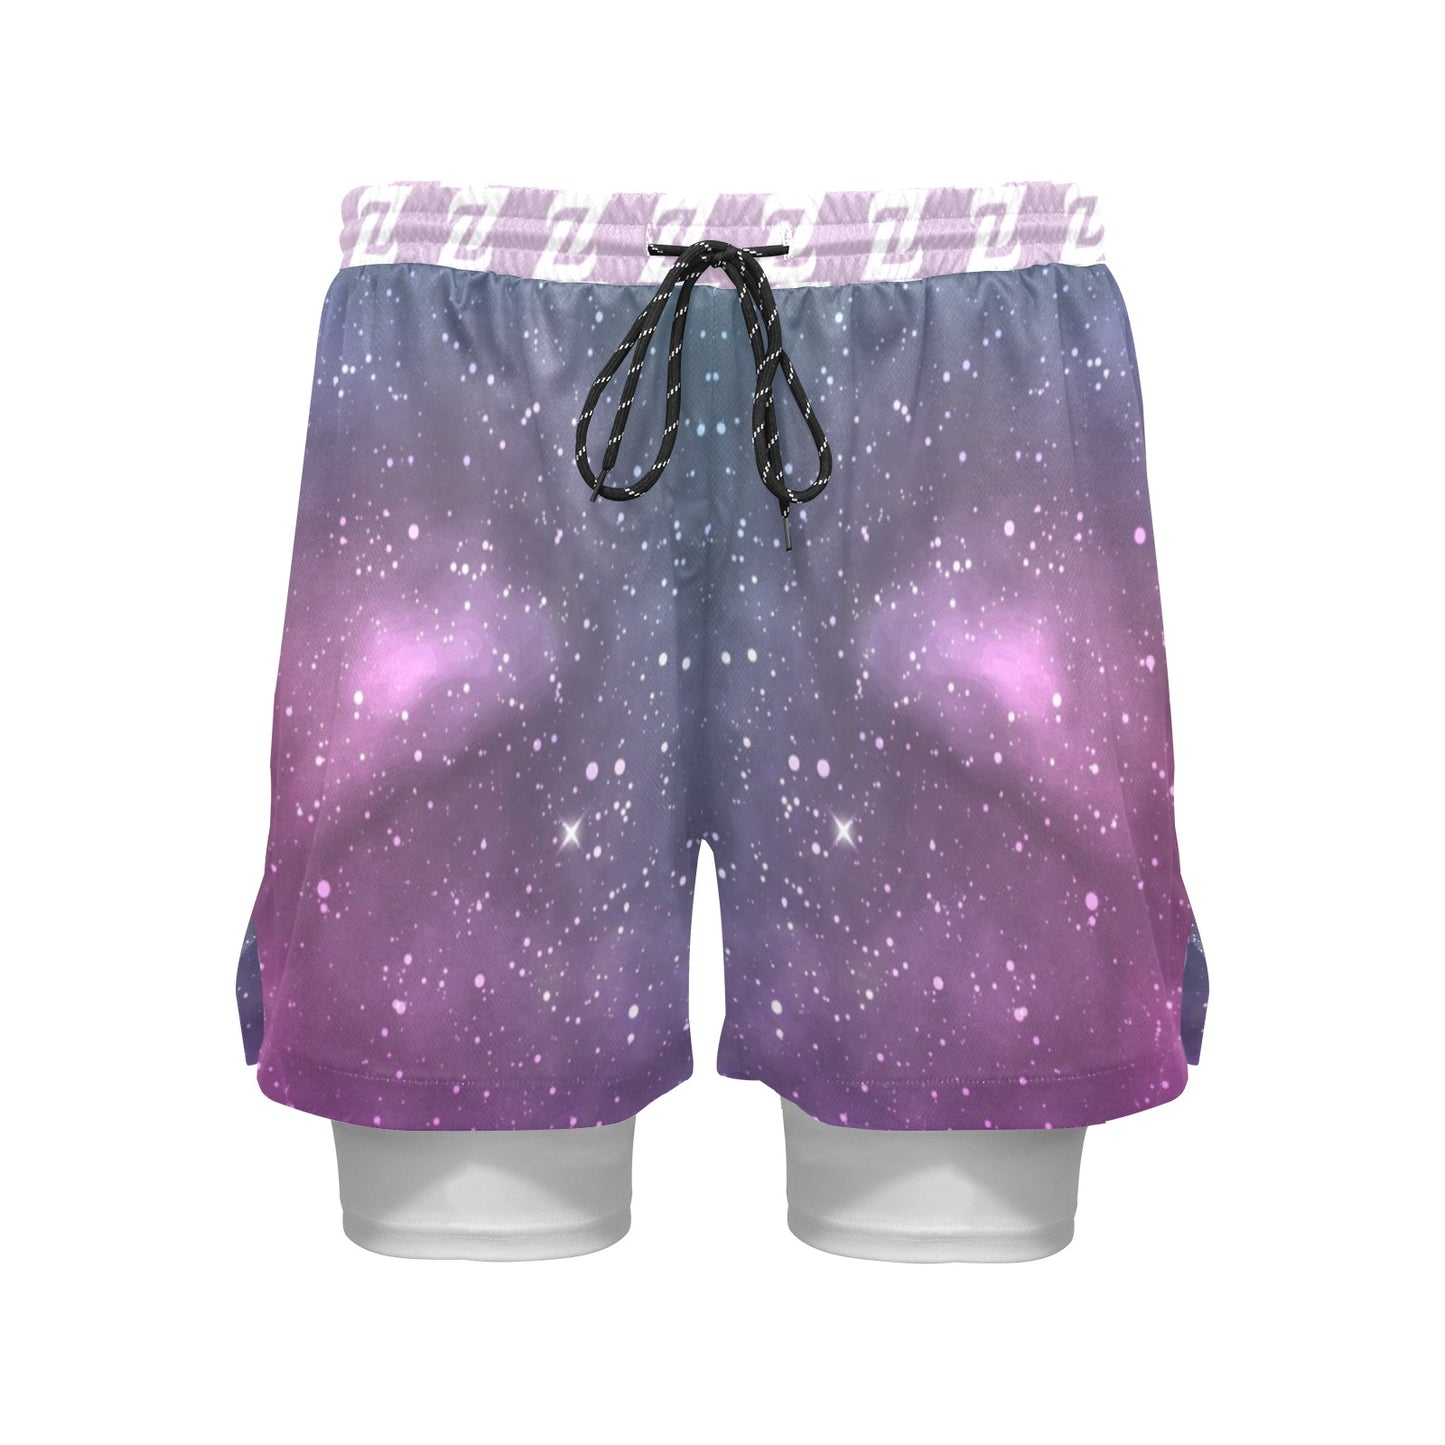 Zen Shorts with Liner - Galaxy